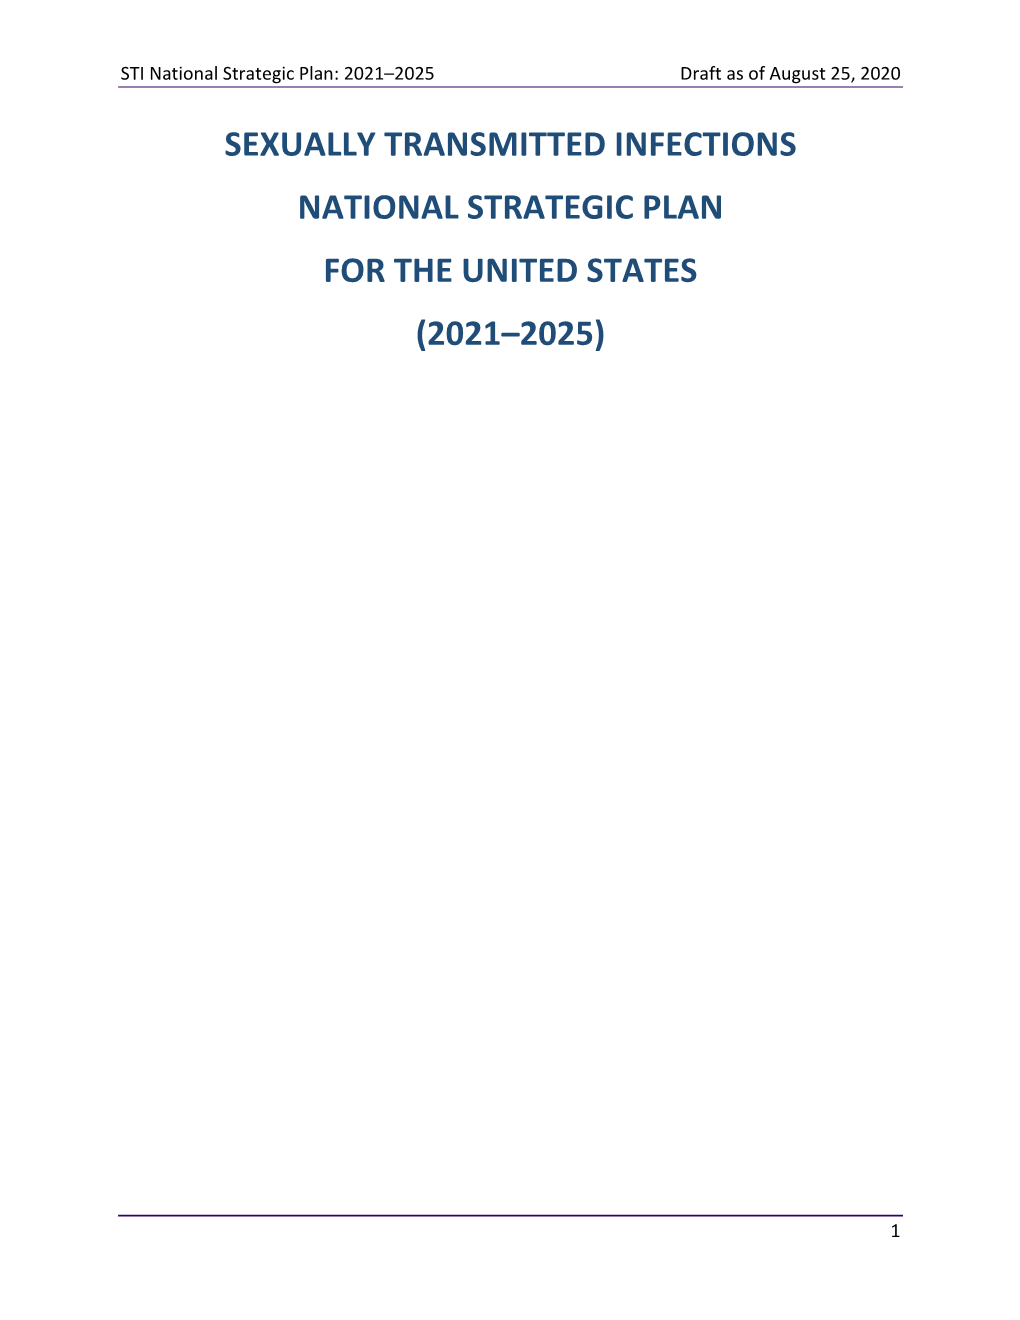 Sexually Transmitted Infections National Strategic Plan 2021-2025